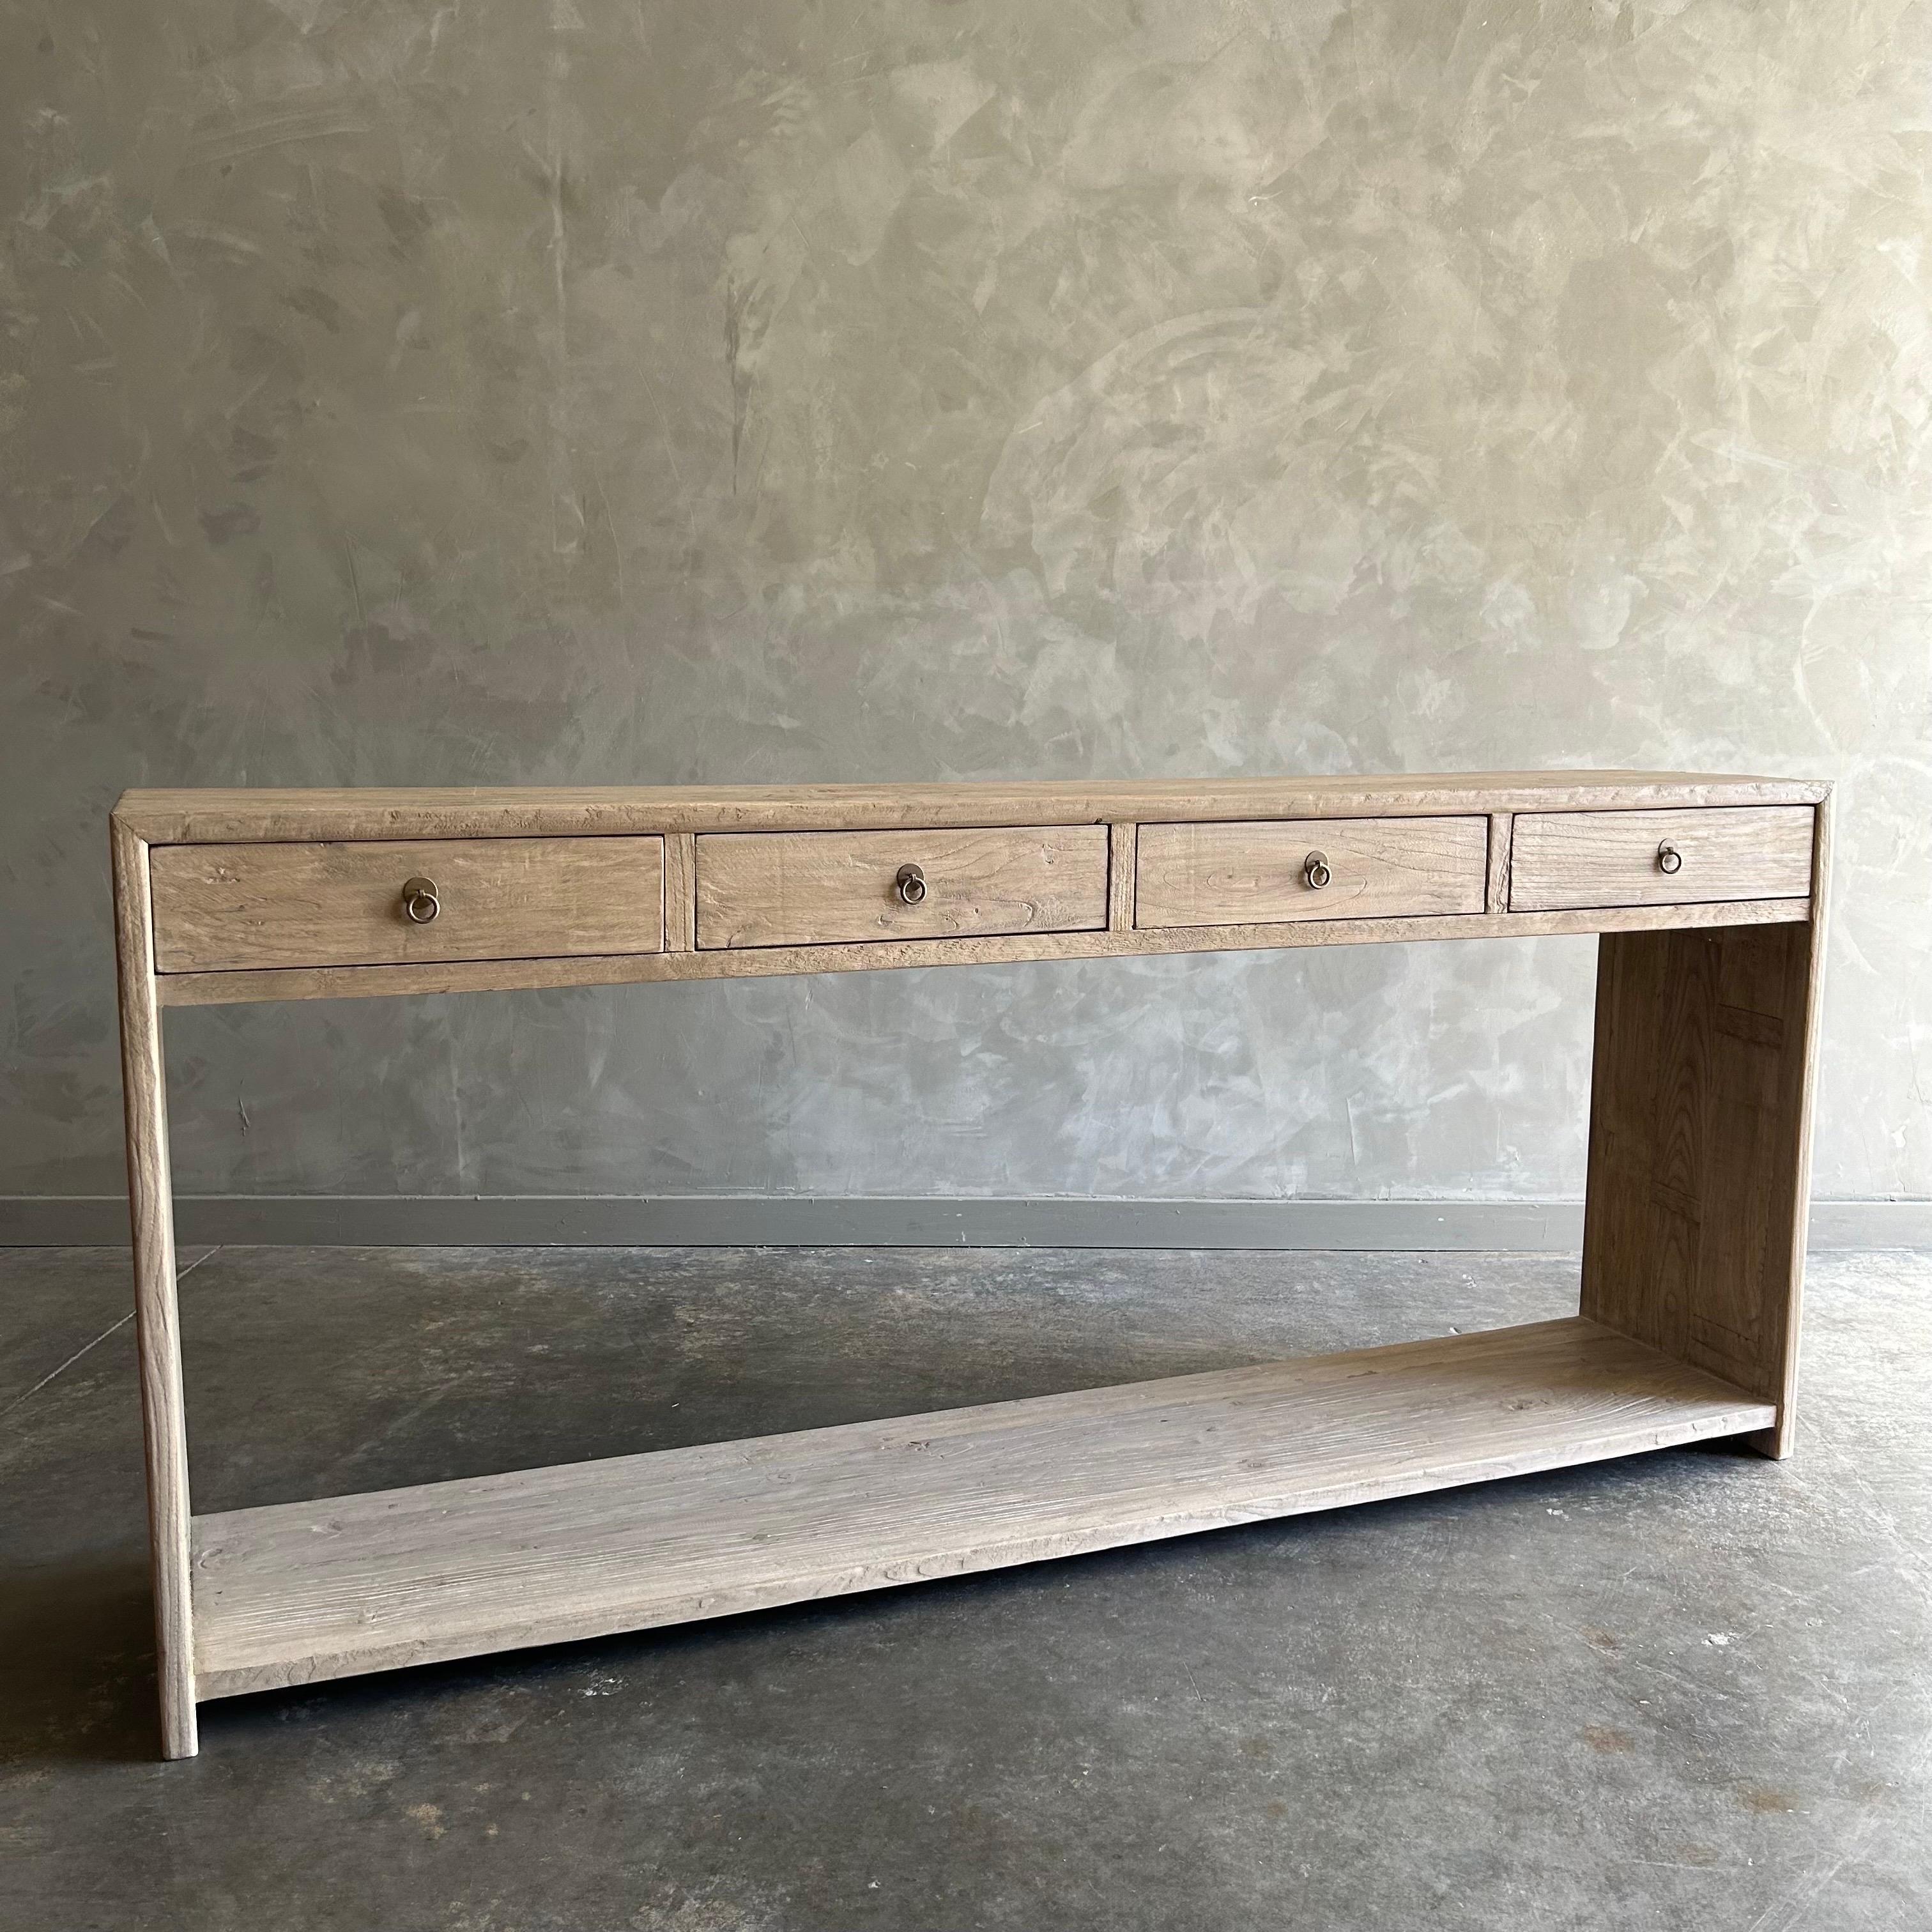 Ivan Drawer Console Drawer in our Natural Finish
The Ivan Console is made from beautiful durable Elm Wood and features 4 drawers for extra storage. The Ivan Console makes the perfect entryway piece, console table or sofa table. Please note variances